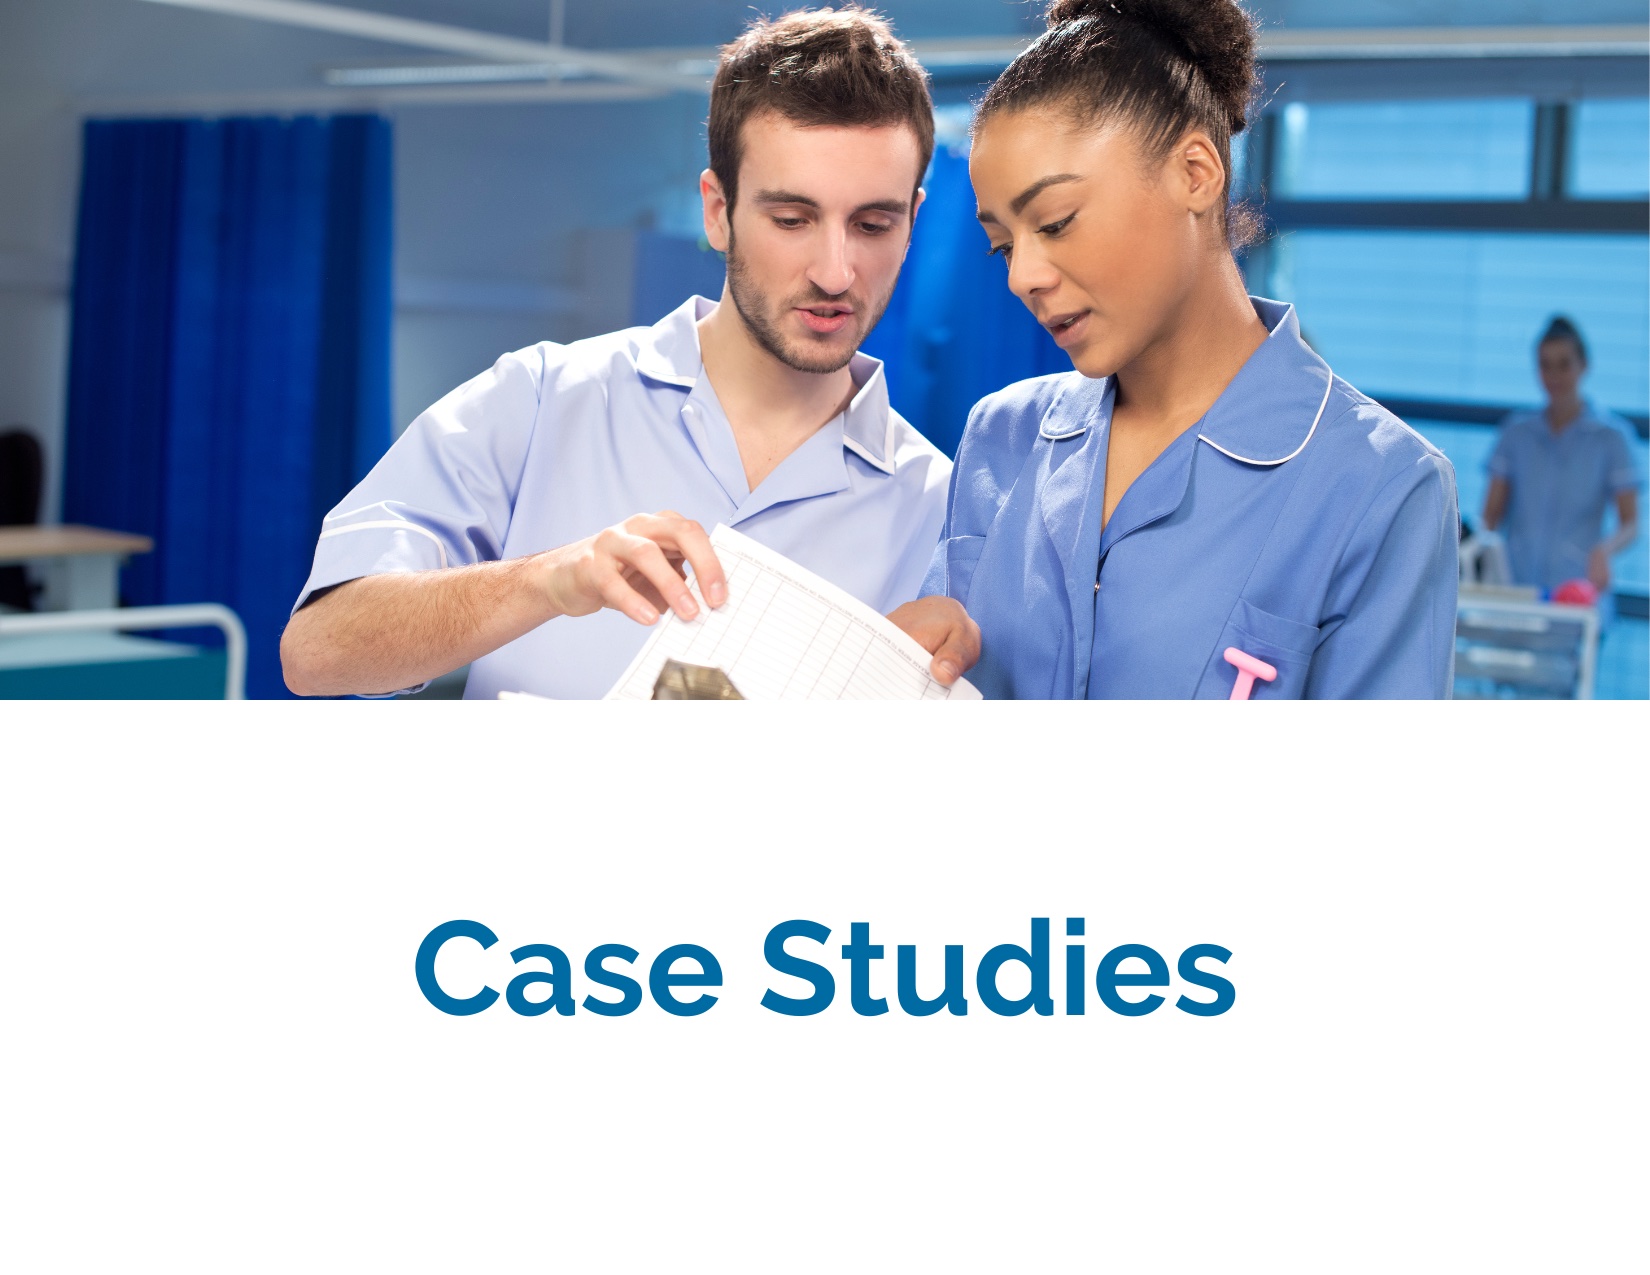 Case Studies Image Only